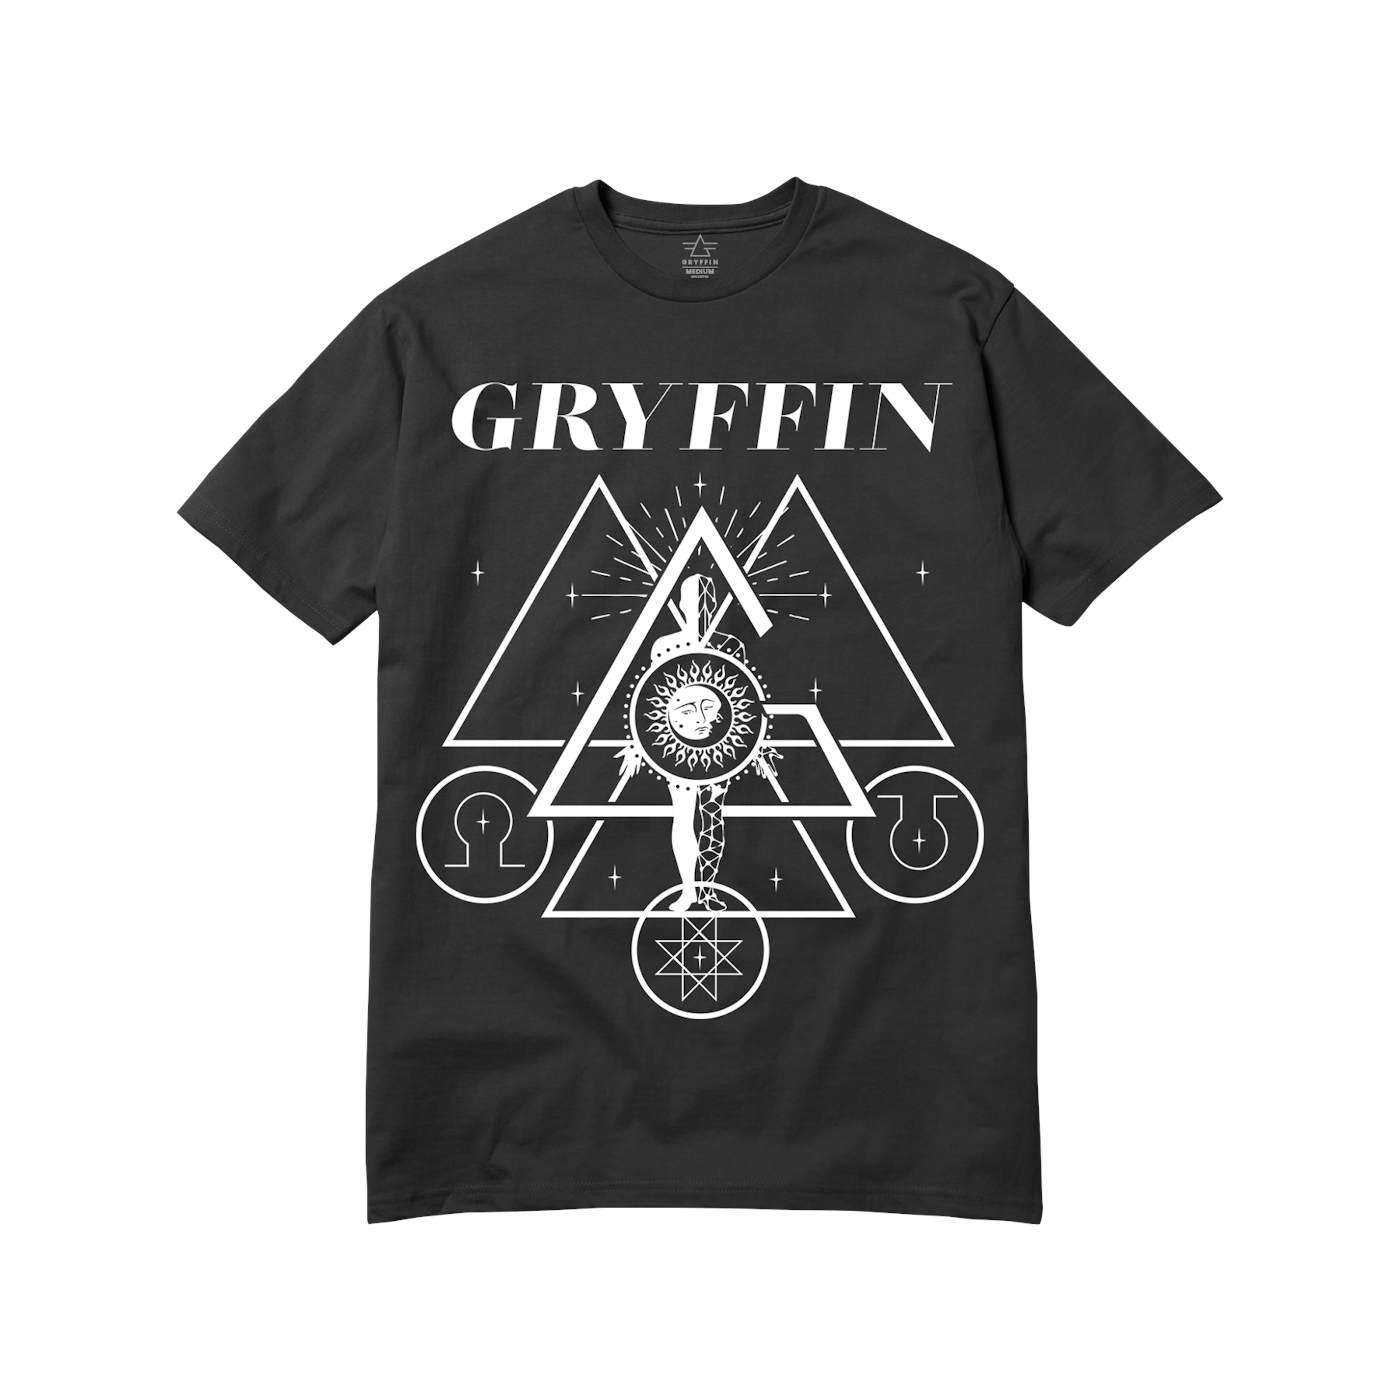 Gryffin Astral Tee